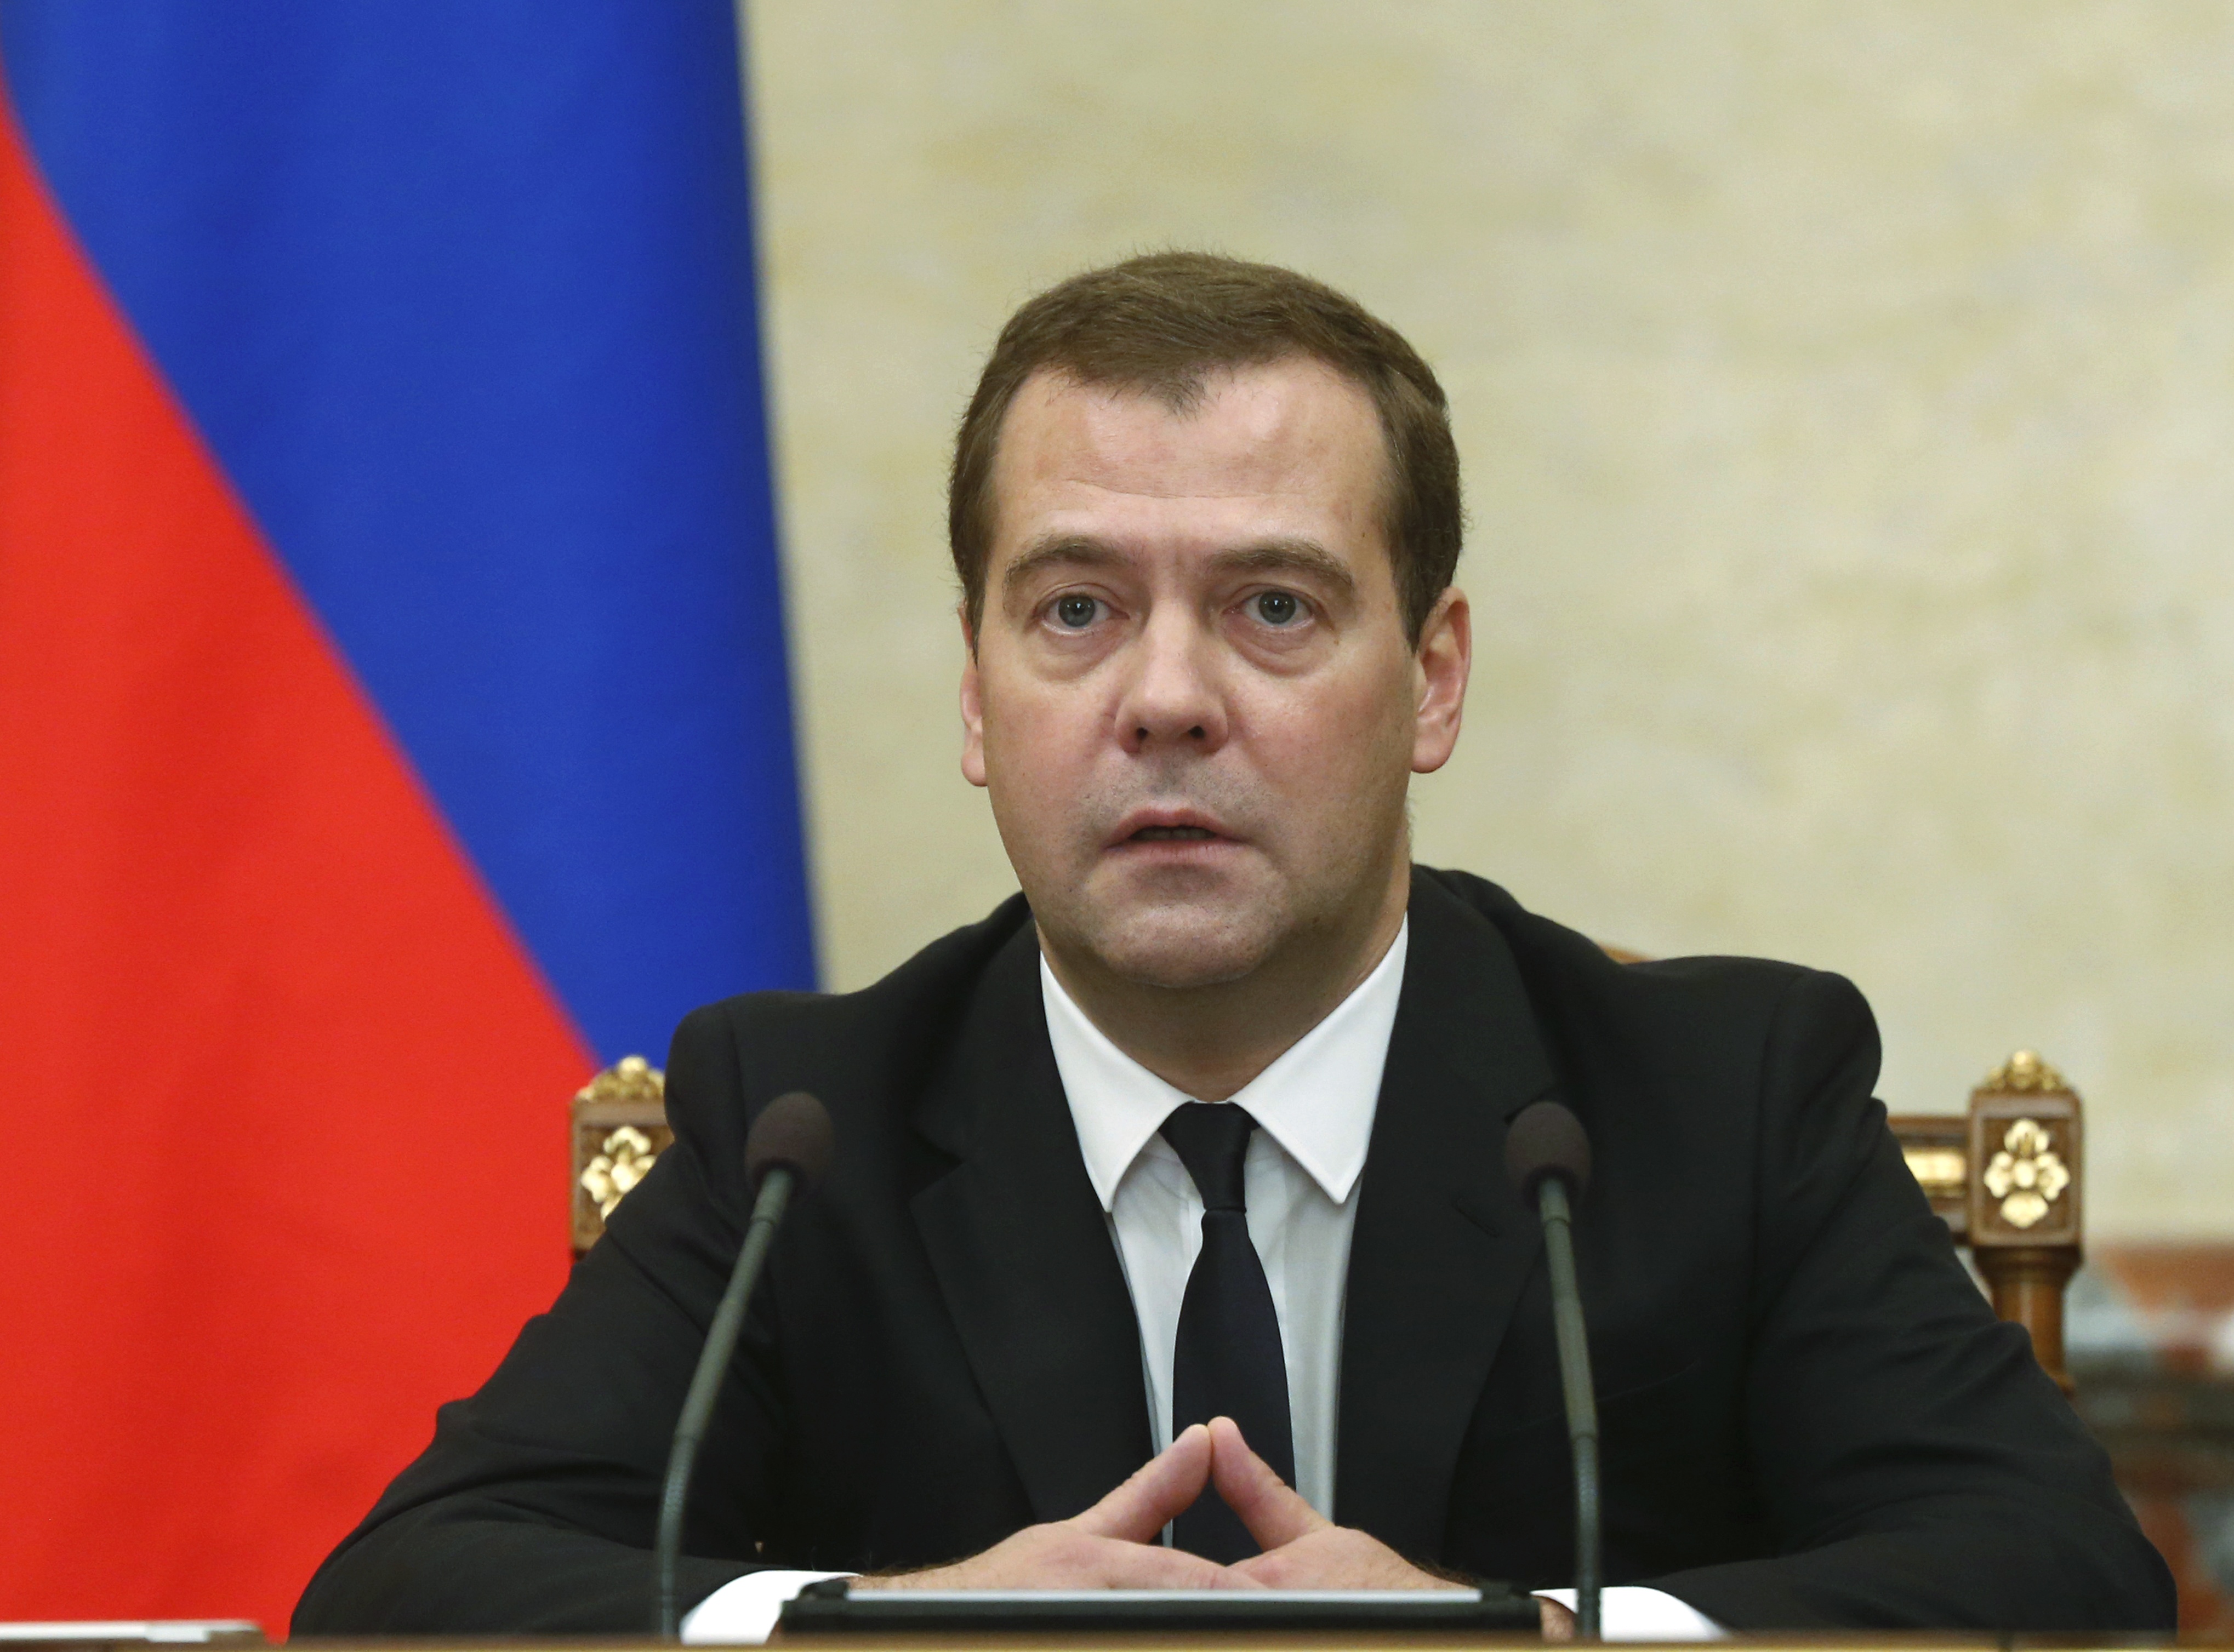 Russian Premier Dmitry Medvedev announces sanctions at the Cabinet meeting in Moscow on Thursday, Aug. 7. (Dmitry Astakhov—AP)